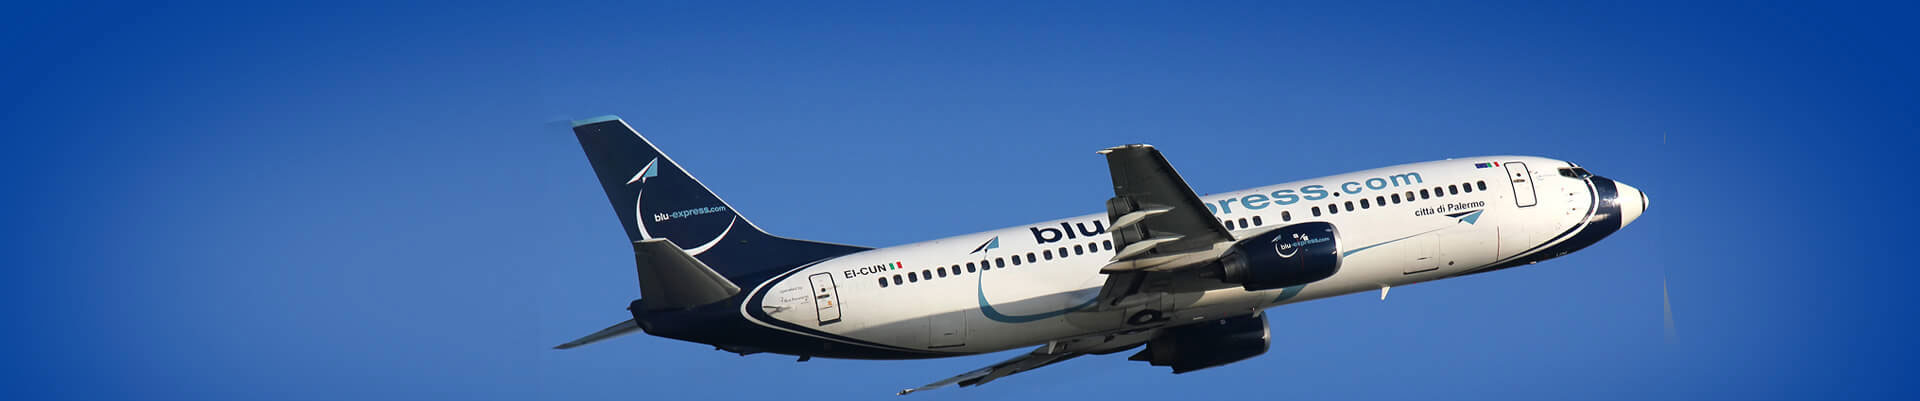 Blu Express | Book Our Flights Online & Save | Low-Fares